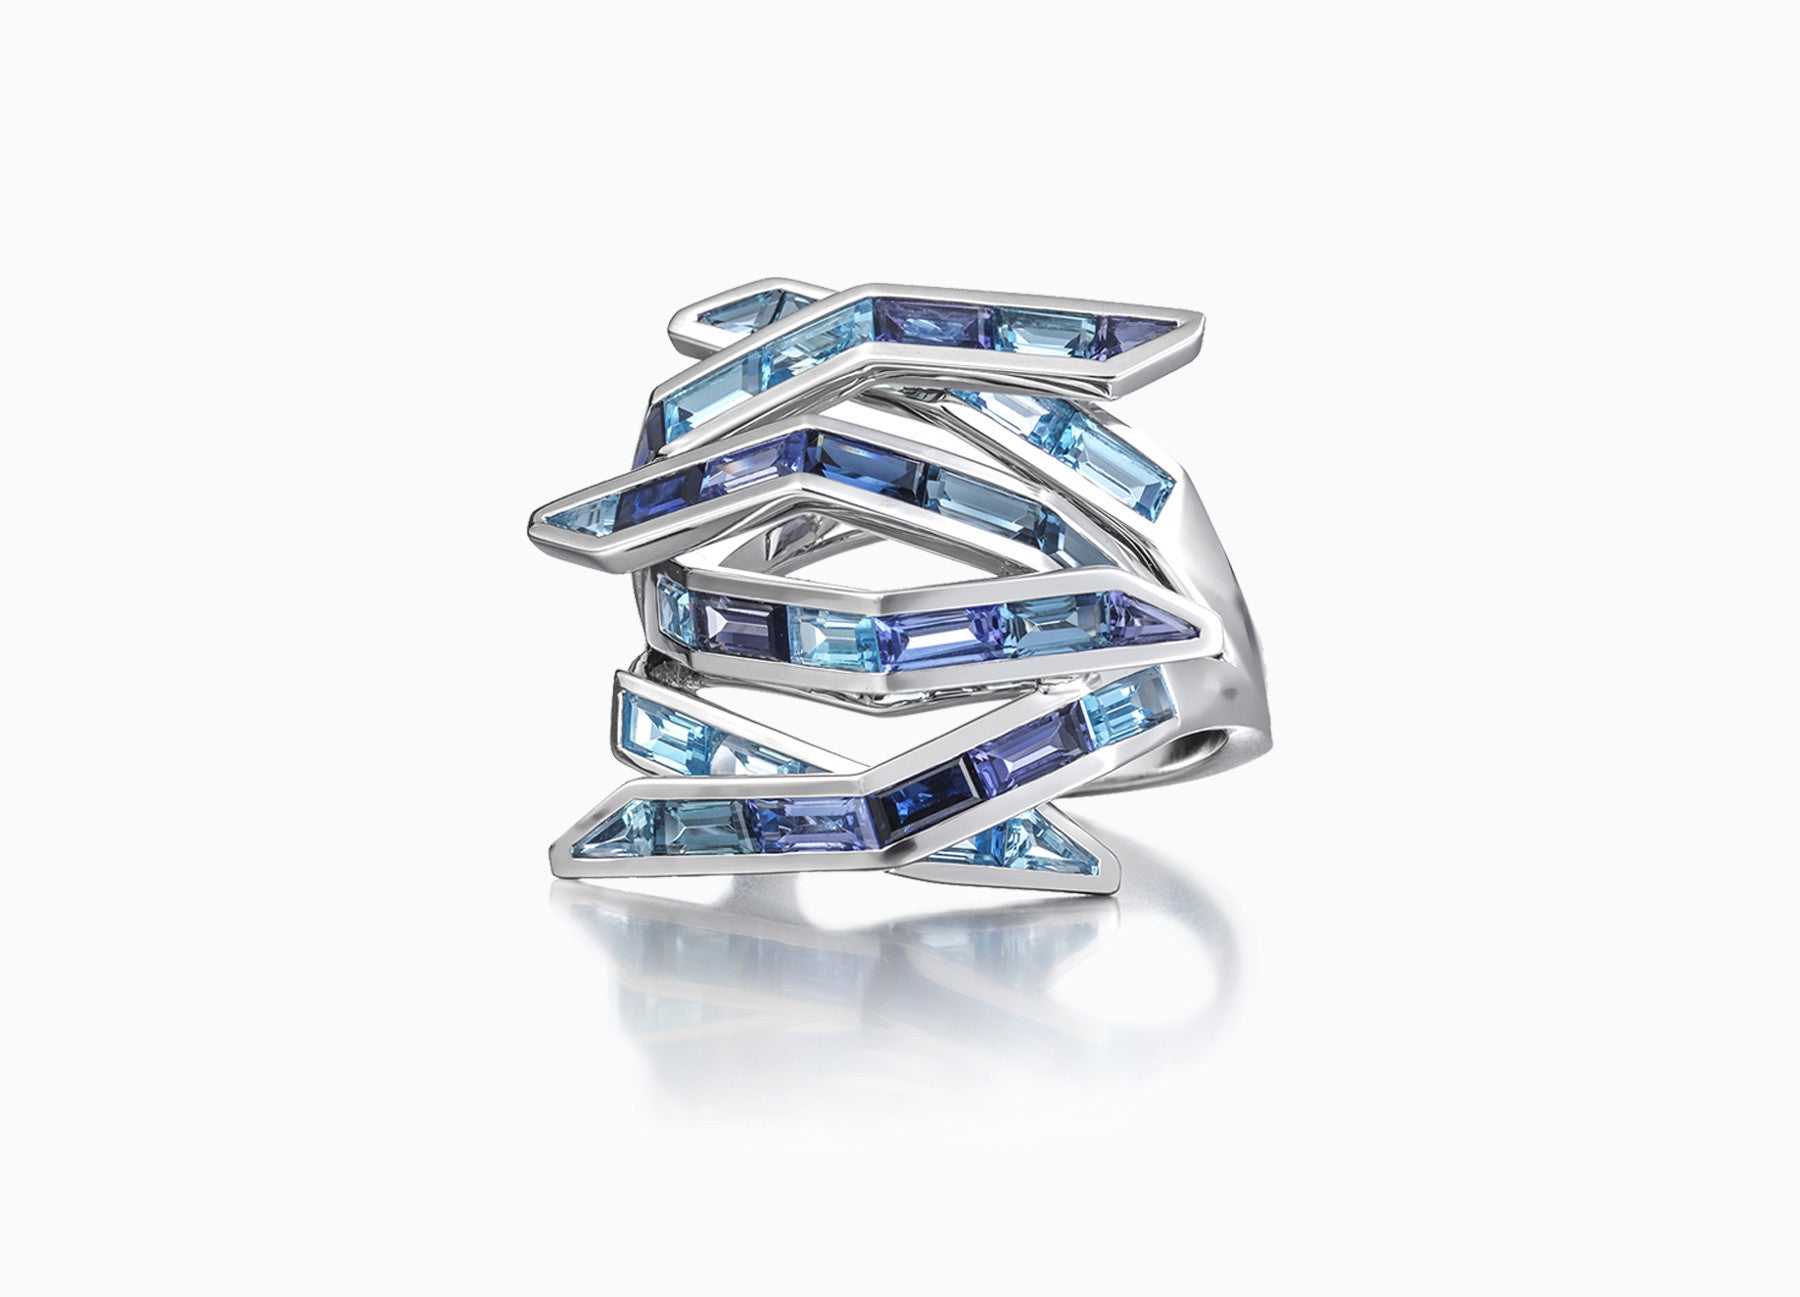 Blue Gem Bombay Ring in 18K White Gold by Tomasz Donocik front view